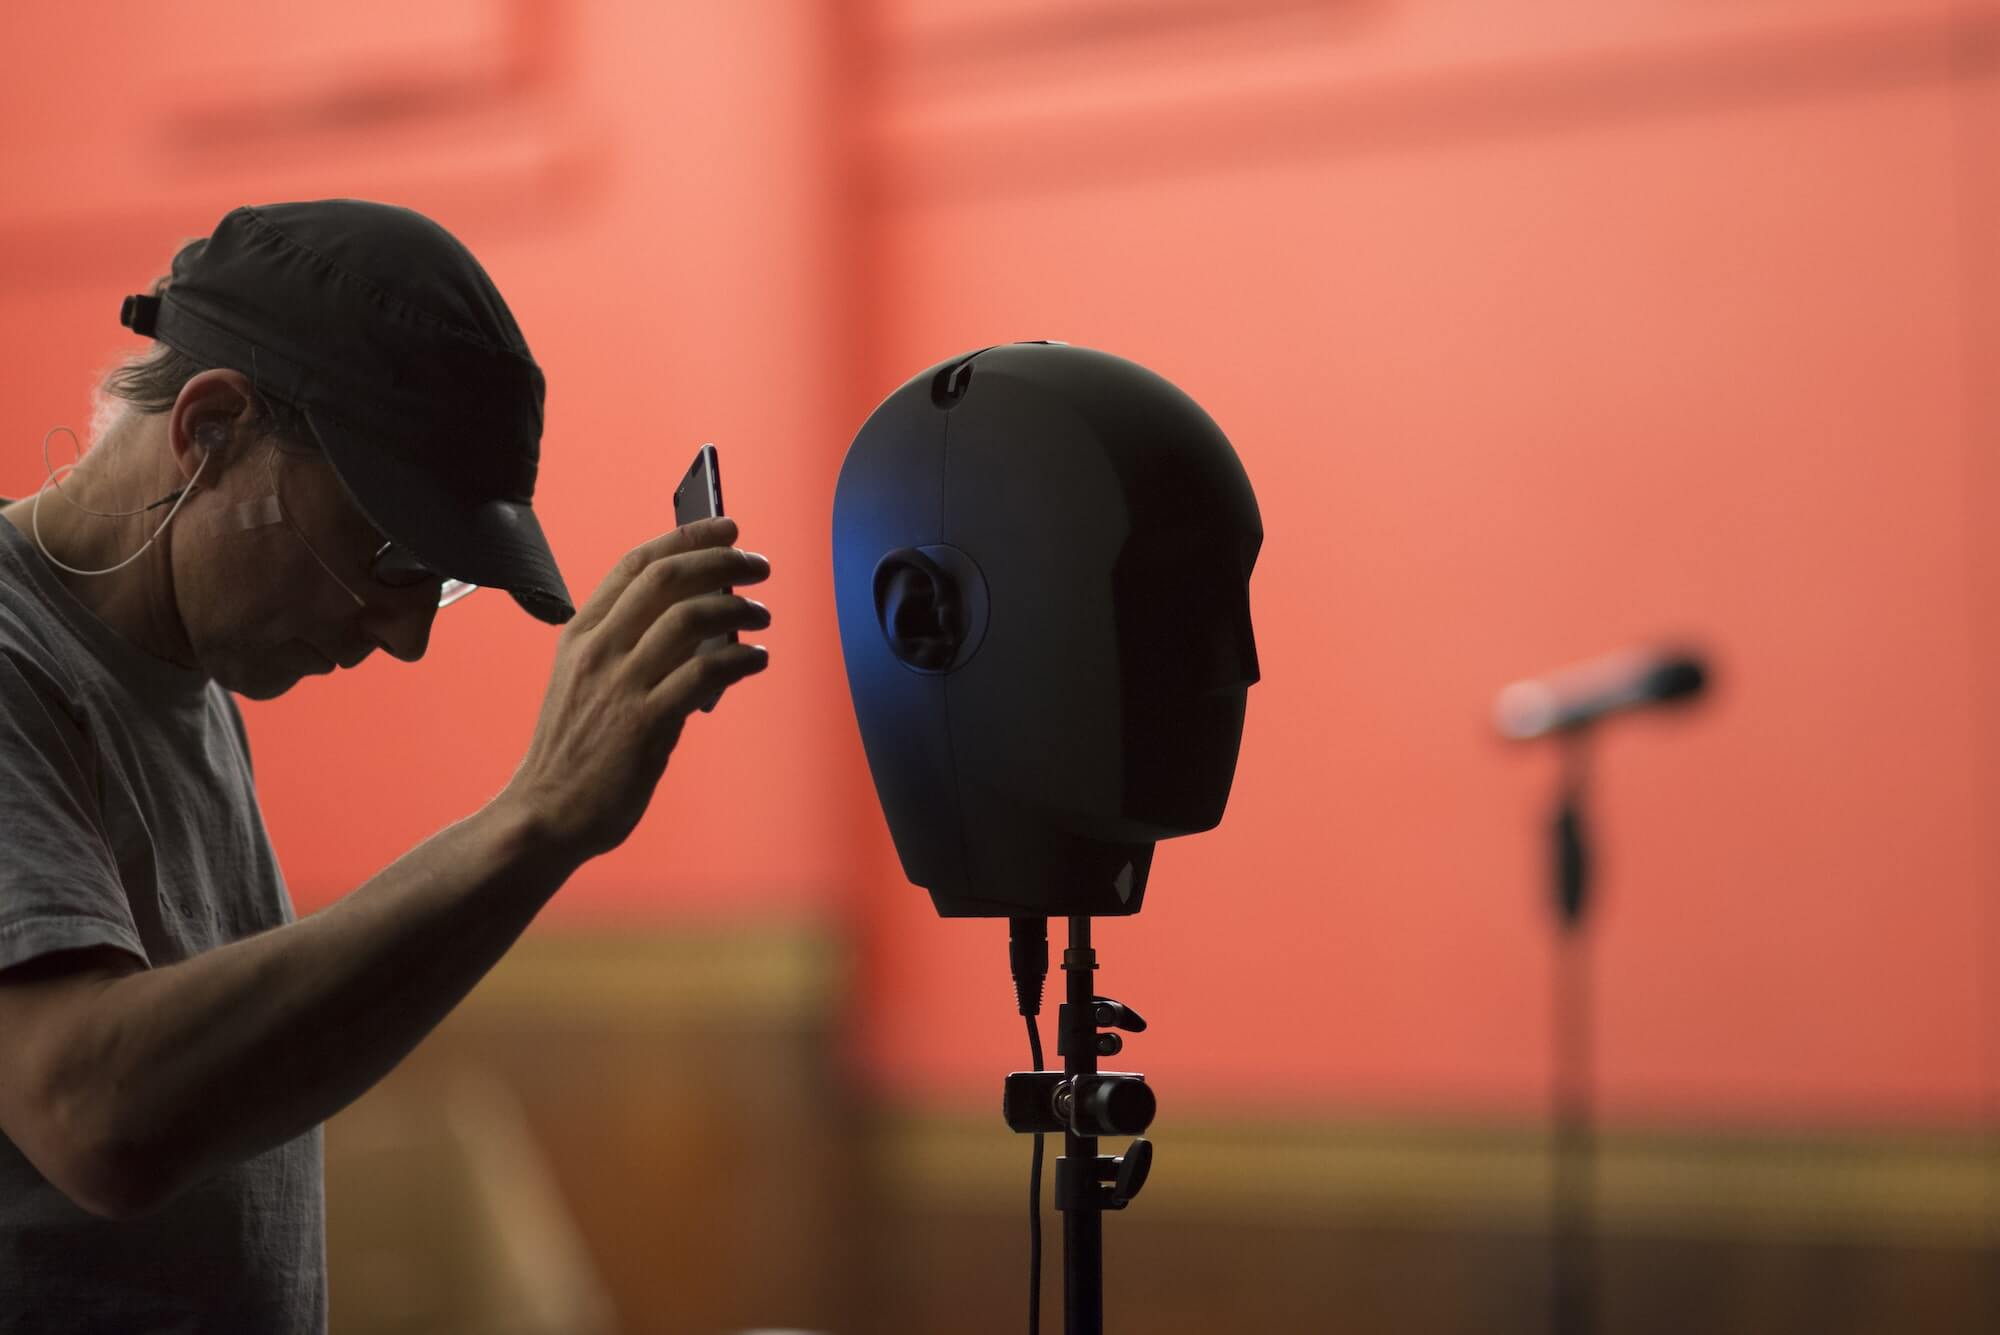 In rehearsals for The Encounter, Simon McBurney bows his head and holds up his phone to the iconic bianural head in a coral-shaded room